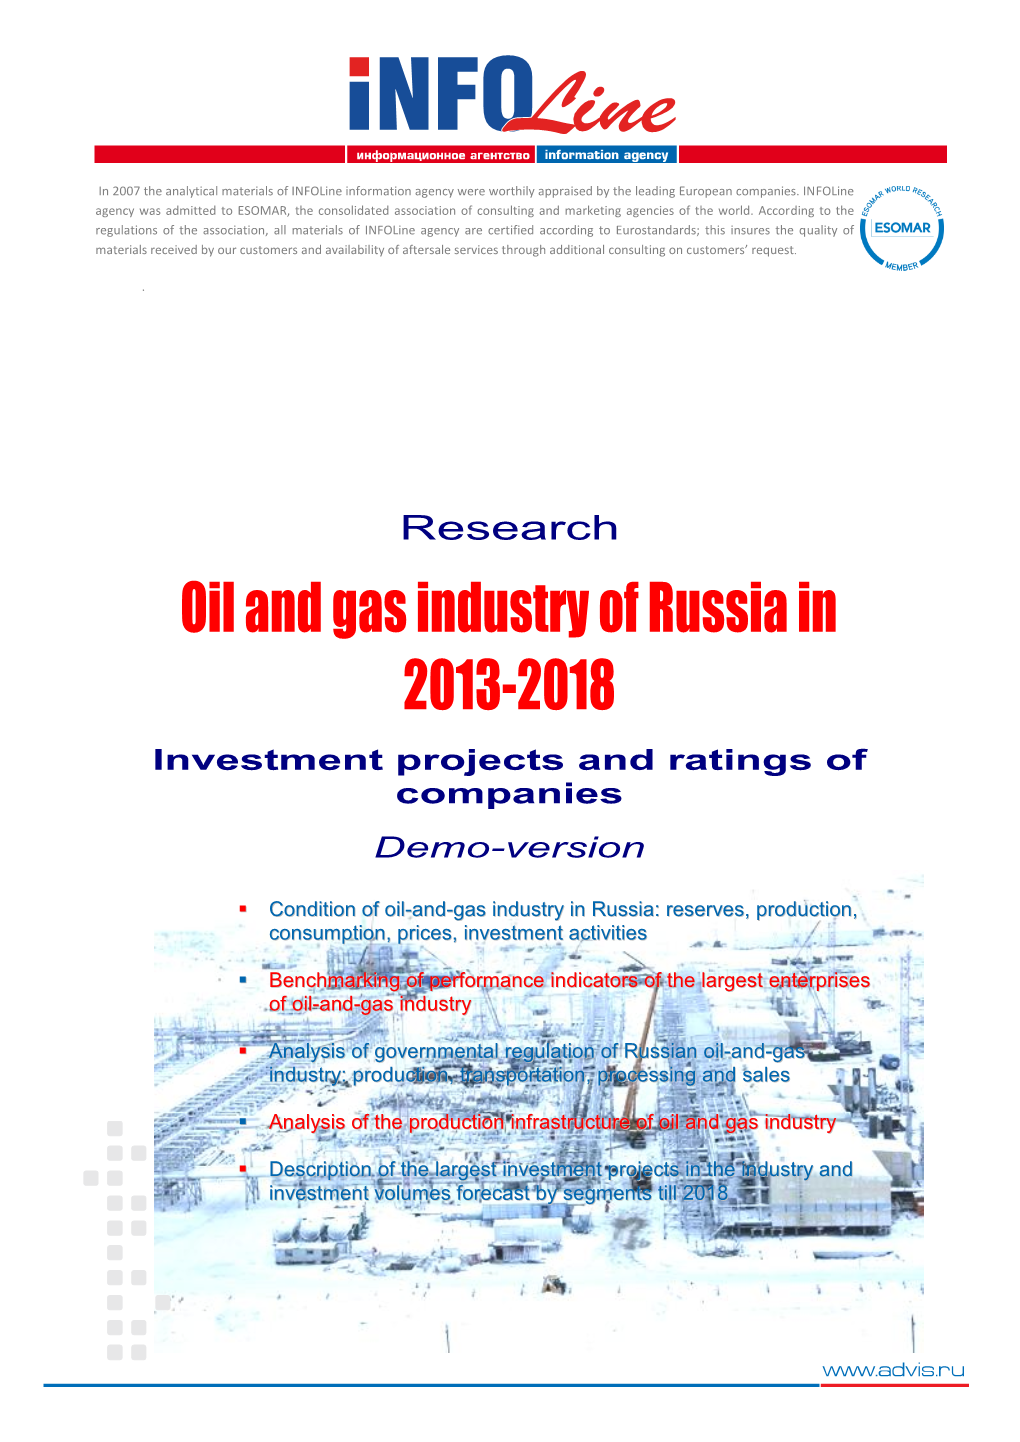 1.4. Analysis of Governmental Regulation of Gas Industry in Russia